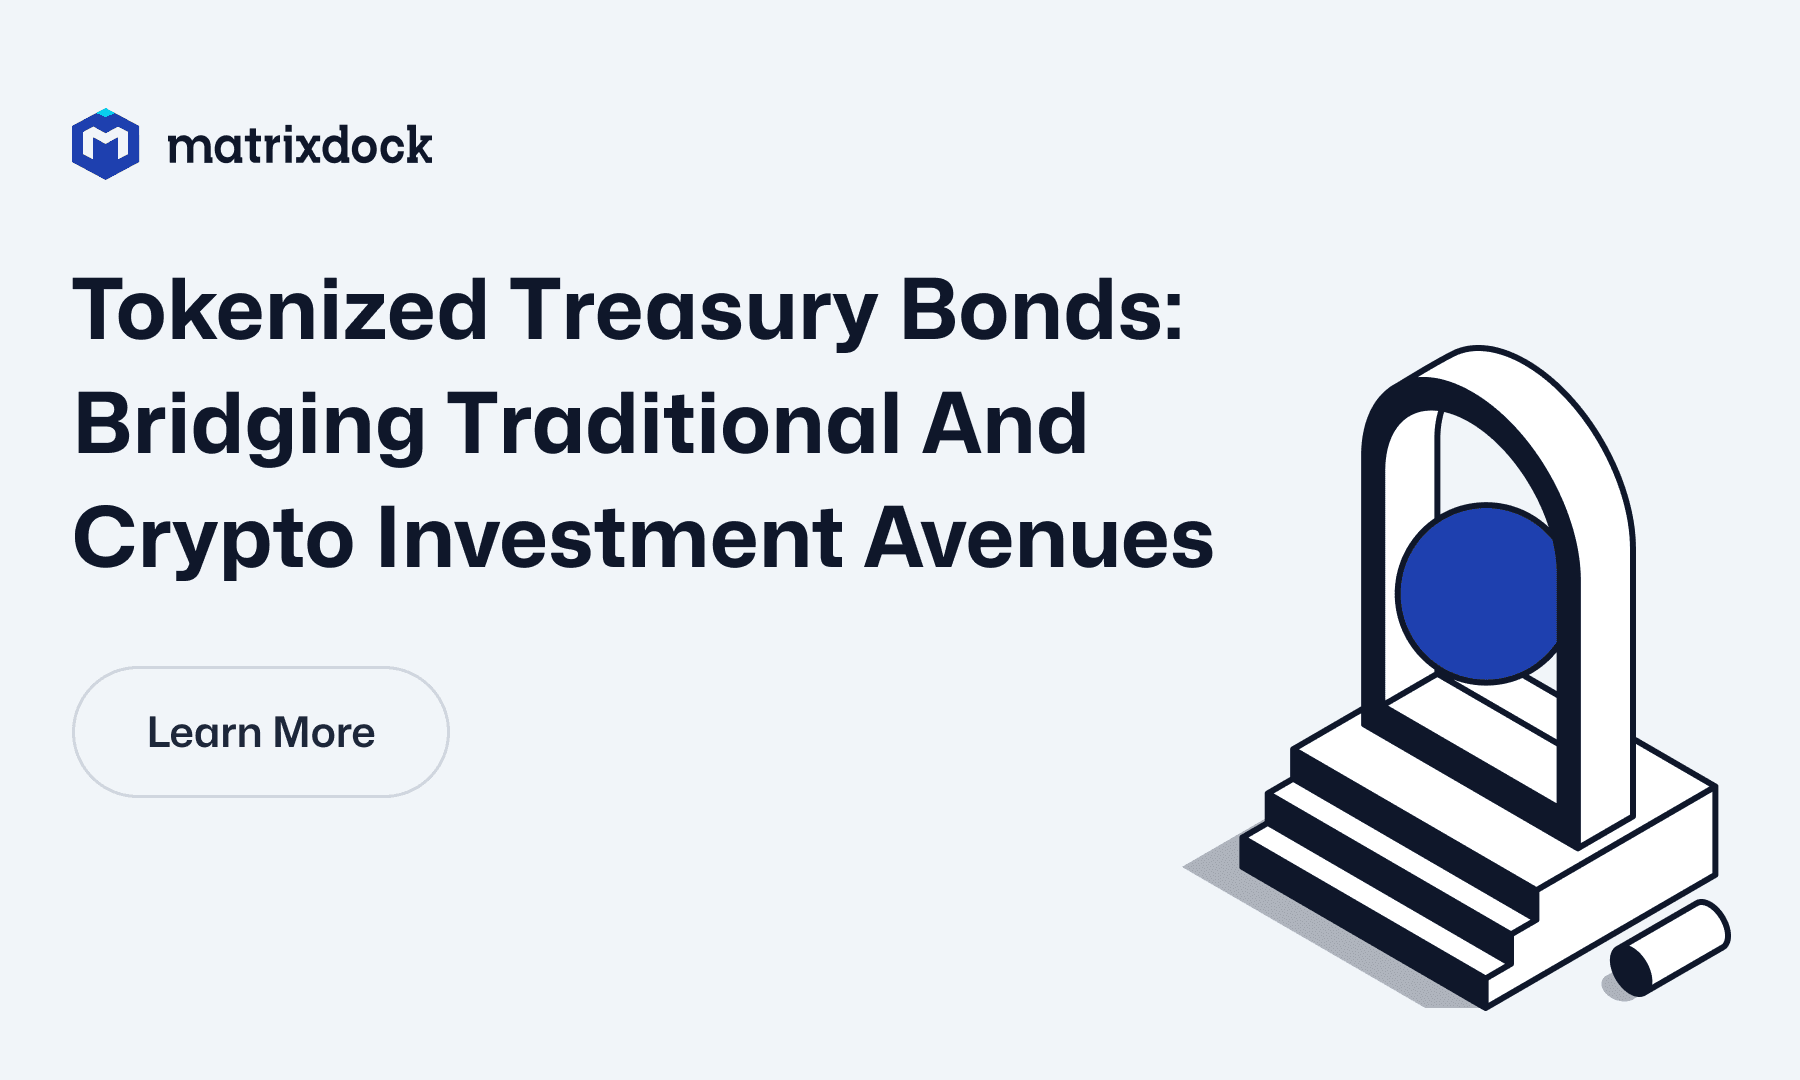 Tokenized Treasury Bonds: Bridging Traditional And Crypto Investment Avenues